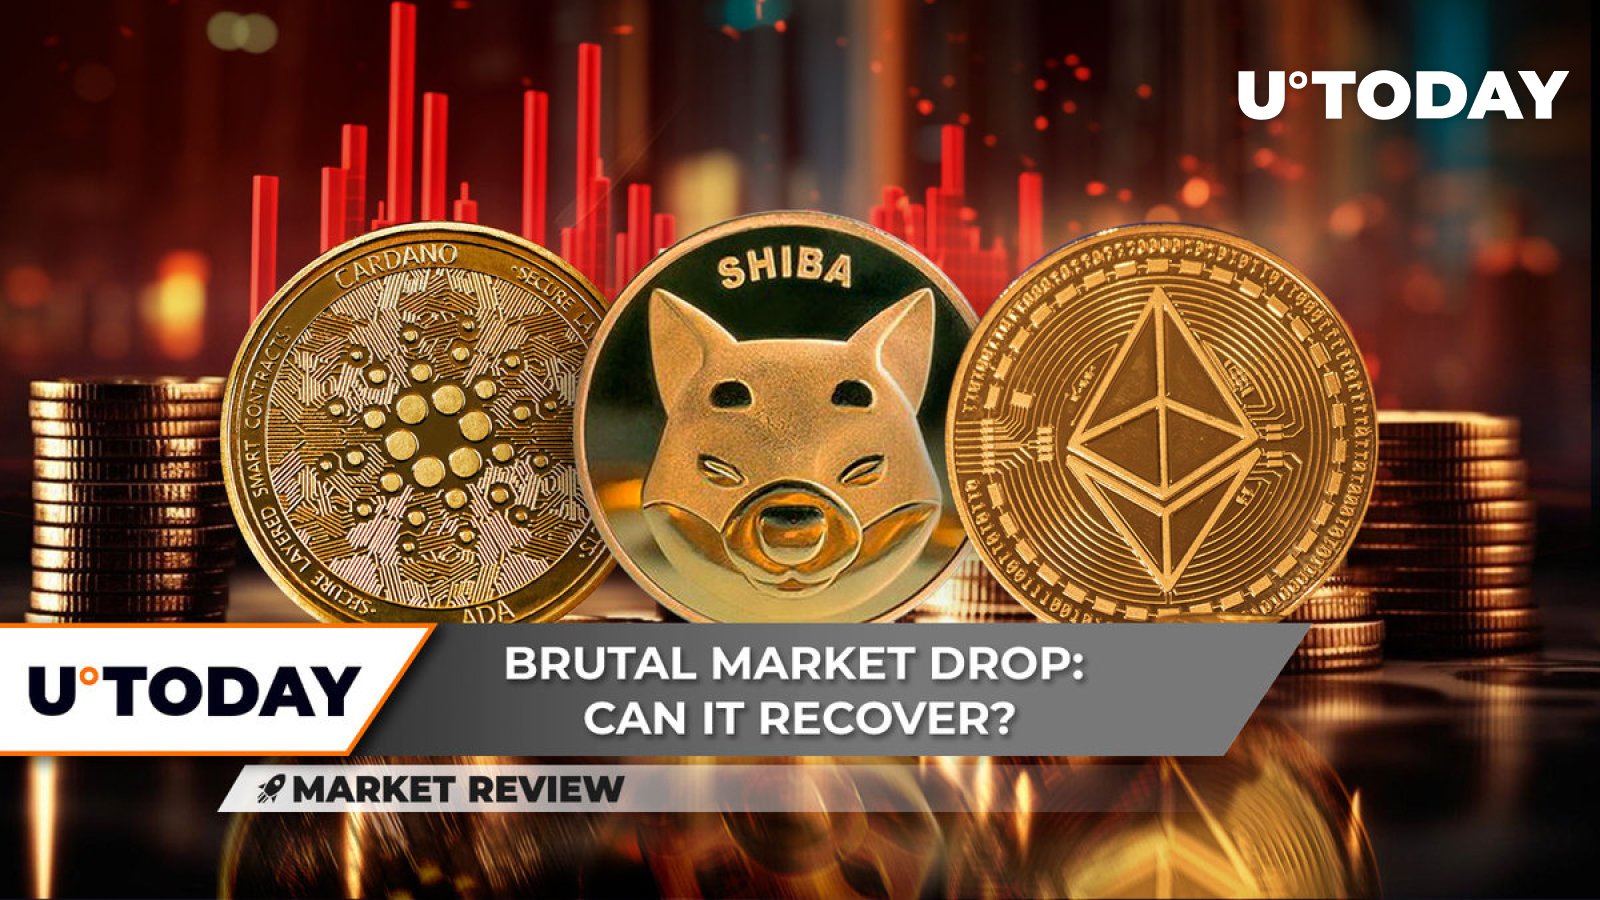 Ethereum (ETH) Secures $3,000, Cardano’s (ADA) Dramatic Drop Irrelevant, Will Shiba Inu (SHIB) Recover After 30% Plunge?